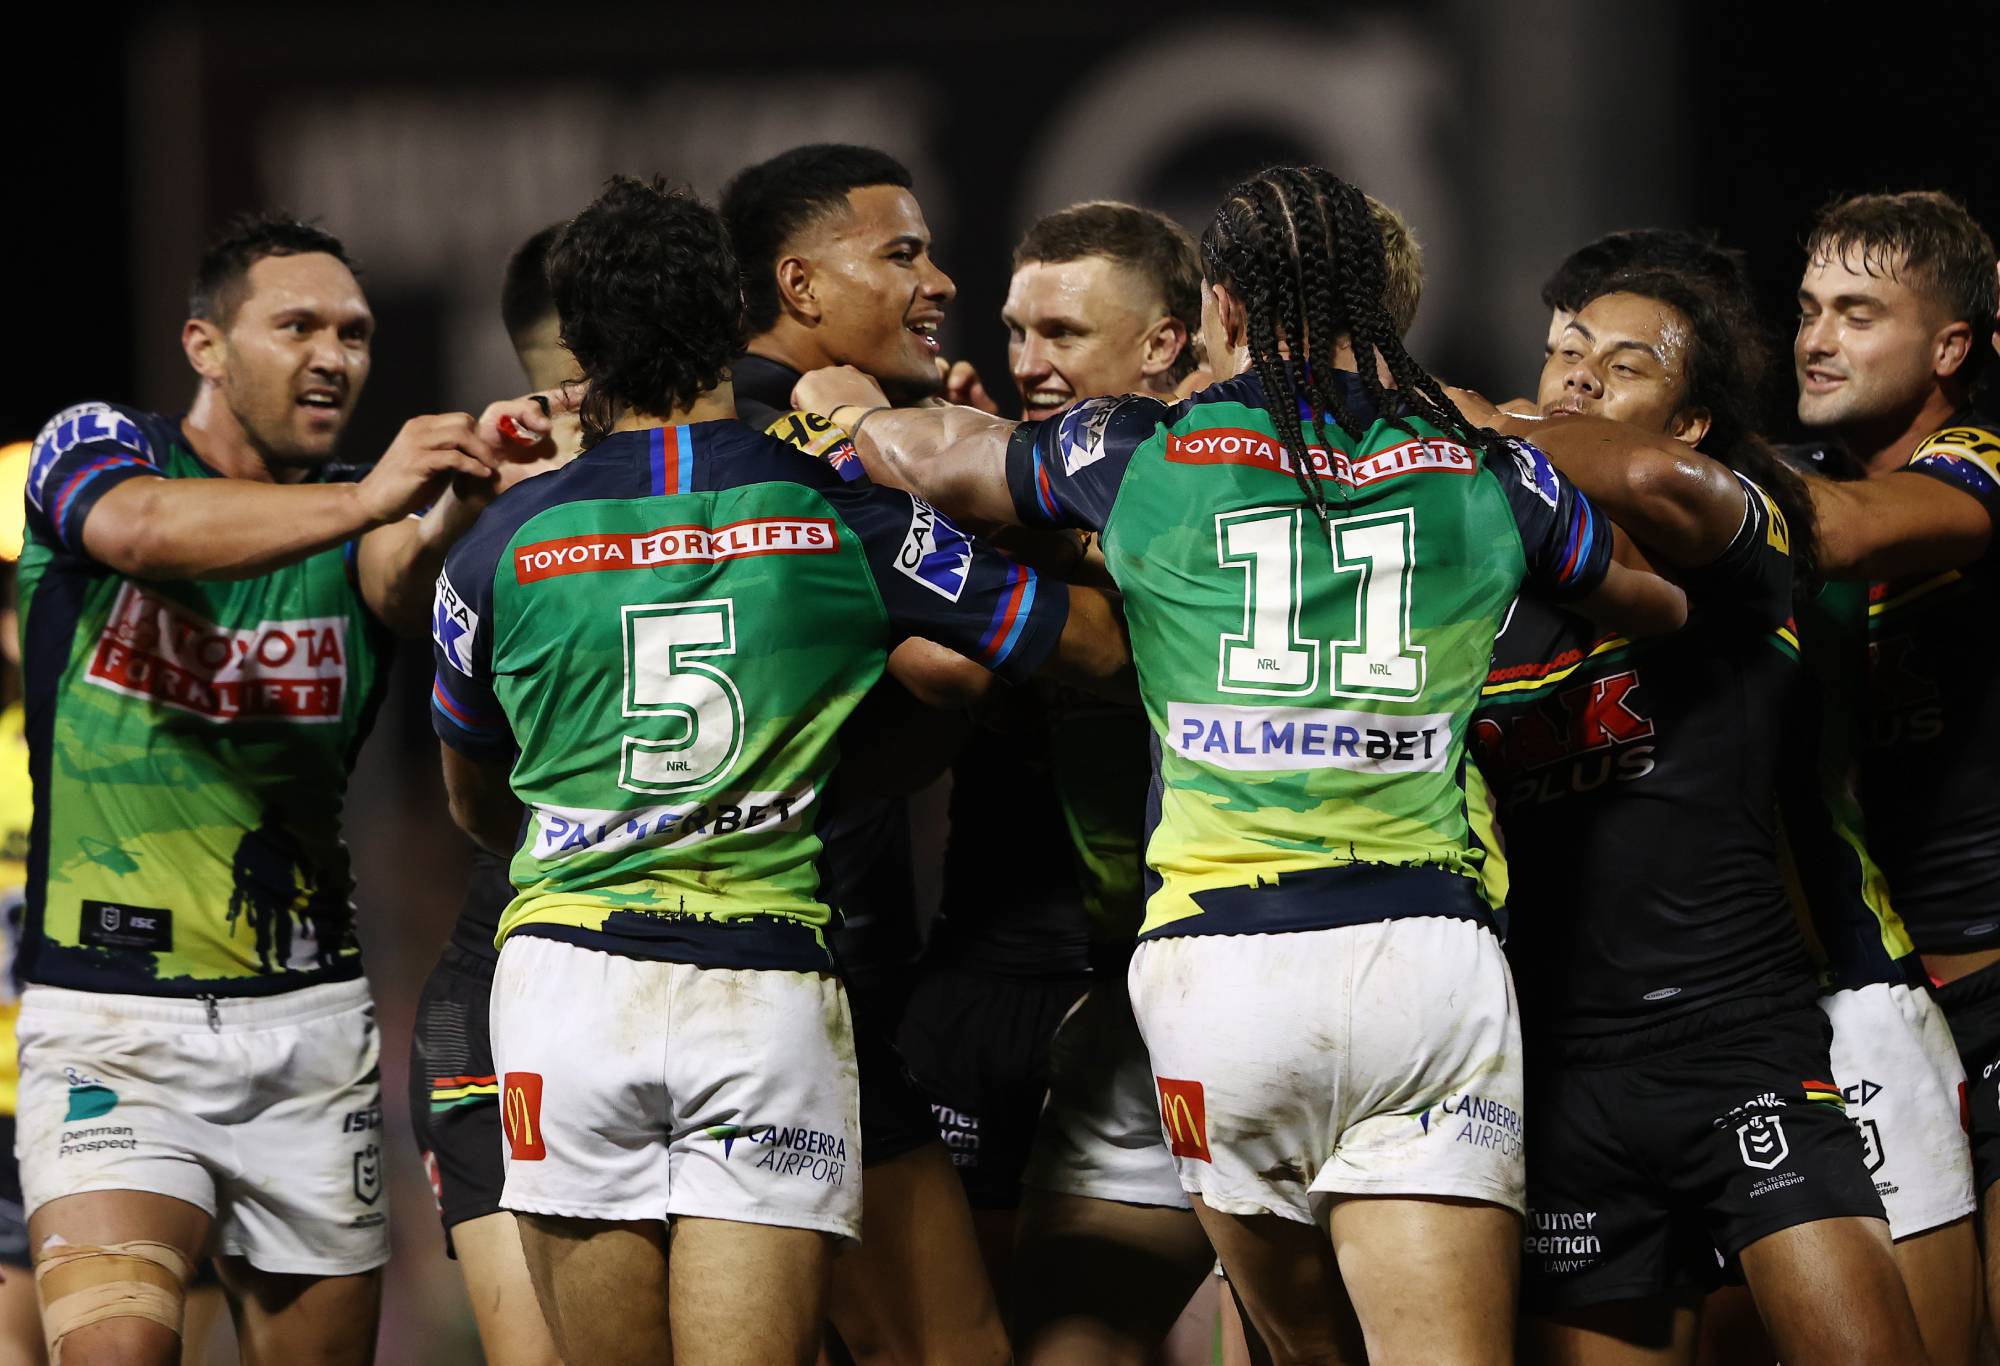 PENRITH, AUSTRALIA - APRIL 24: Stephen Crichton of the Panthers and Jack Wighton of the Raiders melee following the round seven NRL match between the Penrith Panthers and the Canberra Raiders at BlueBet Stadium on April 24, 2022, in Penrith, Australia. (Photo by Matt Blyth/Getty Images)